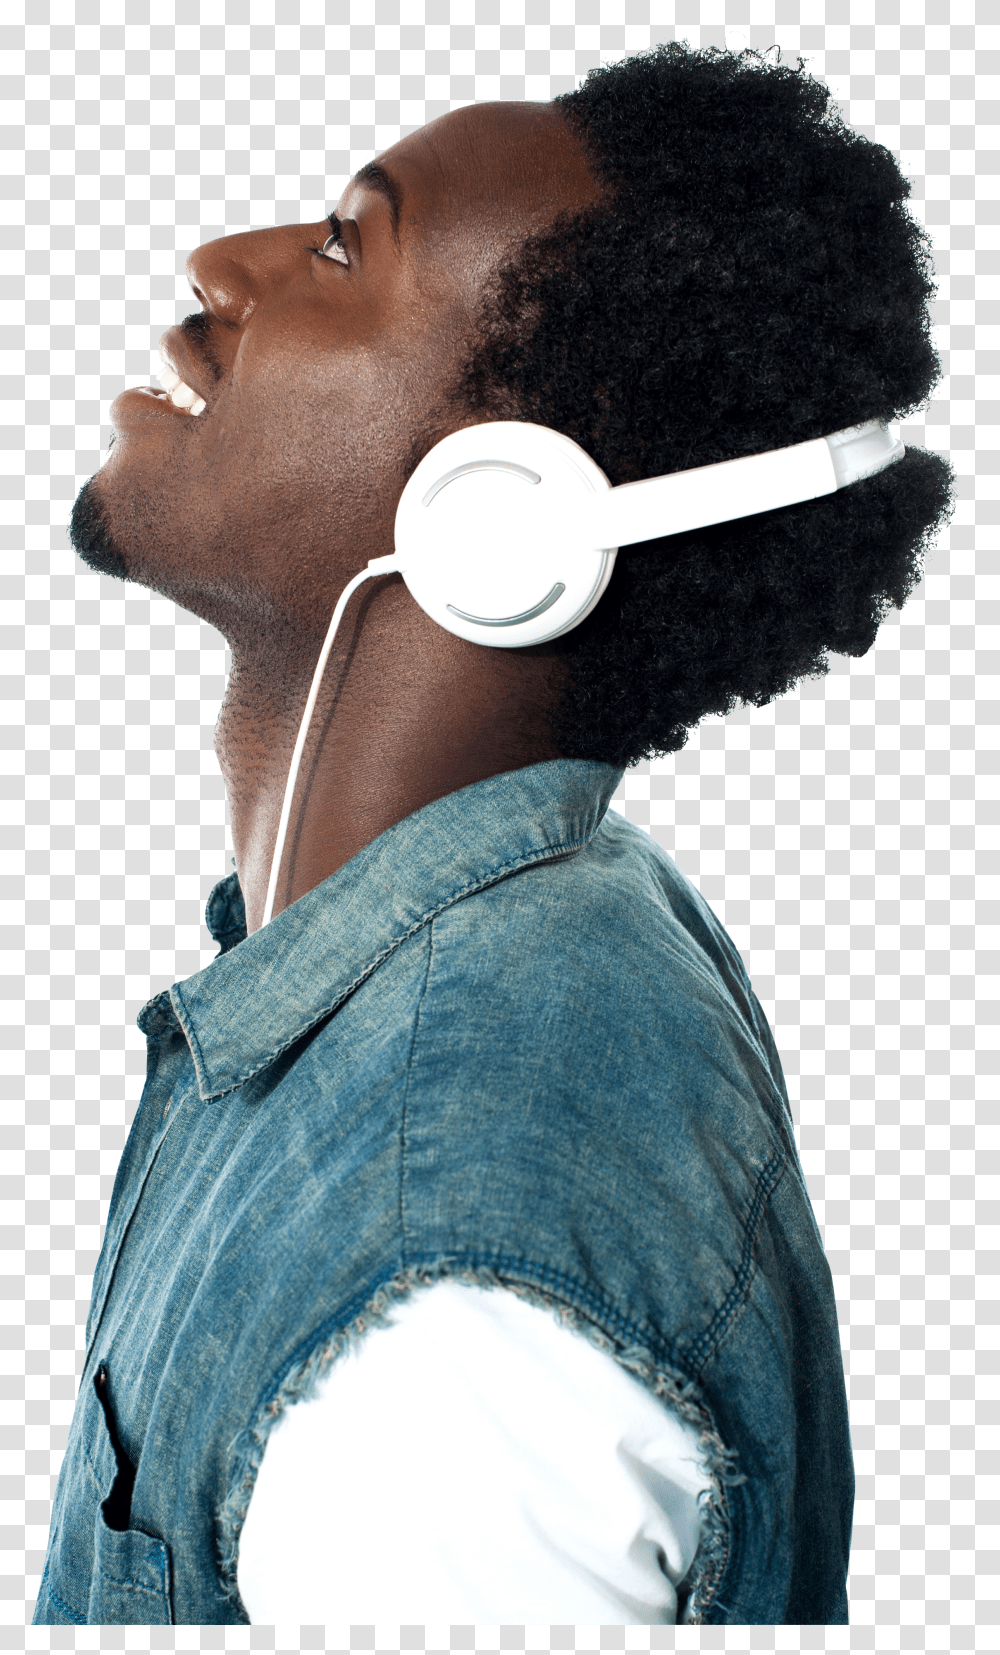 Listening To Music Transparent Png